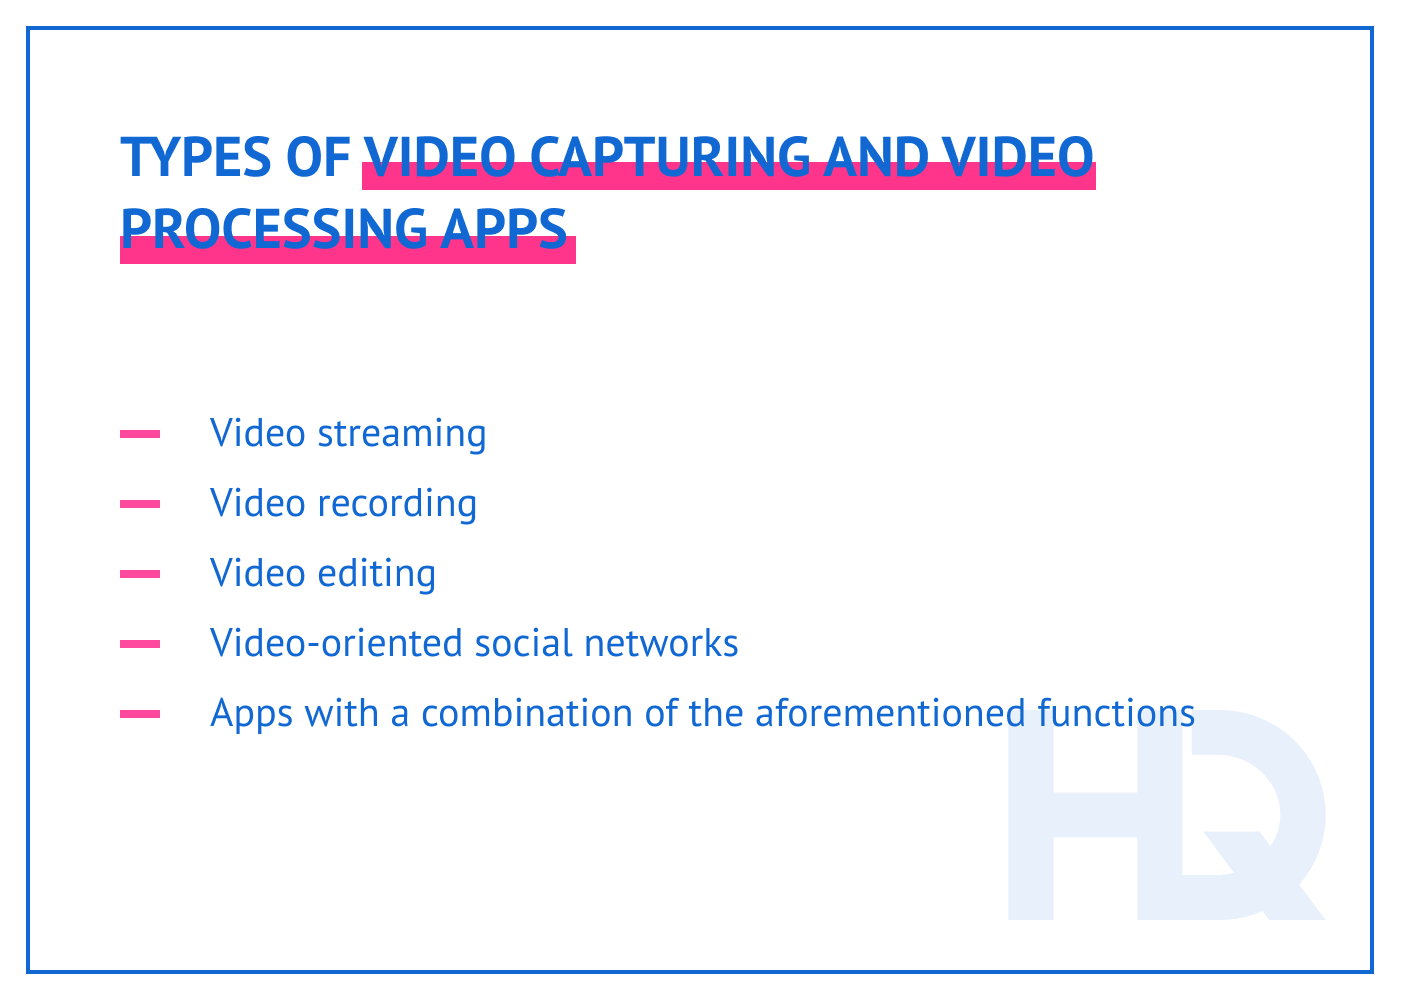 Types of video capturing and video processing apps.